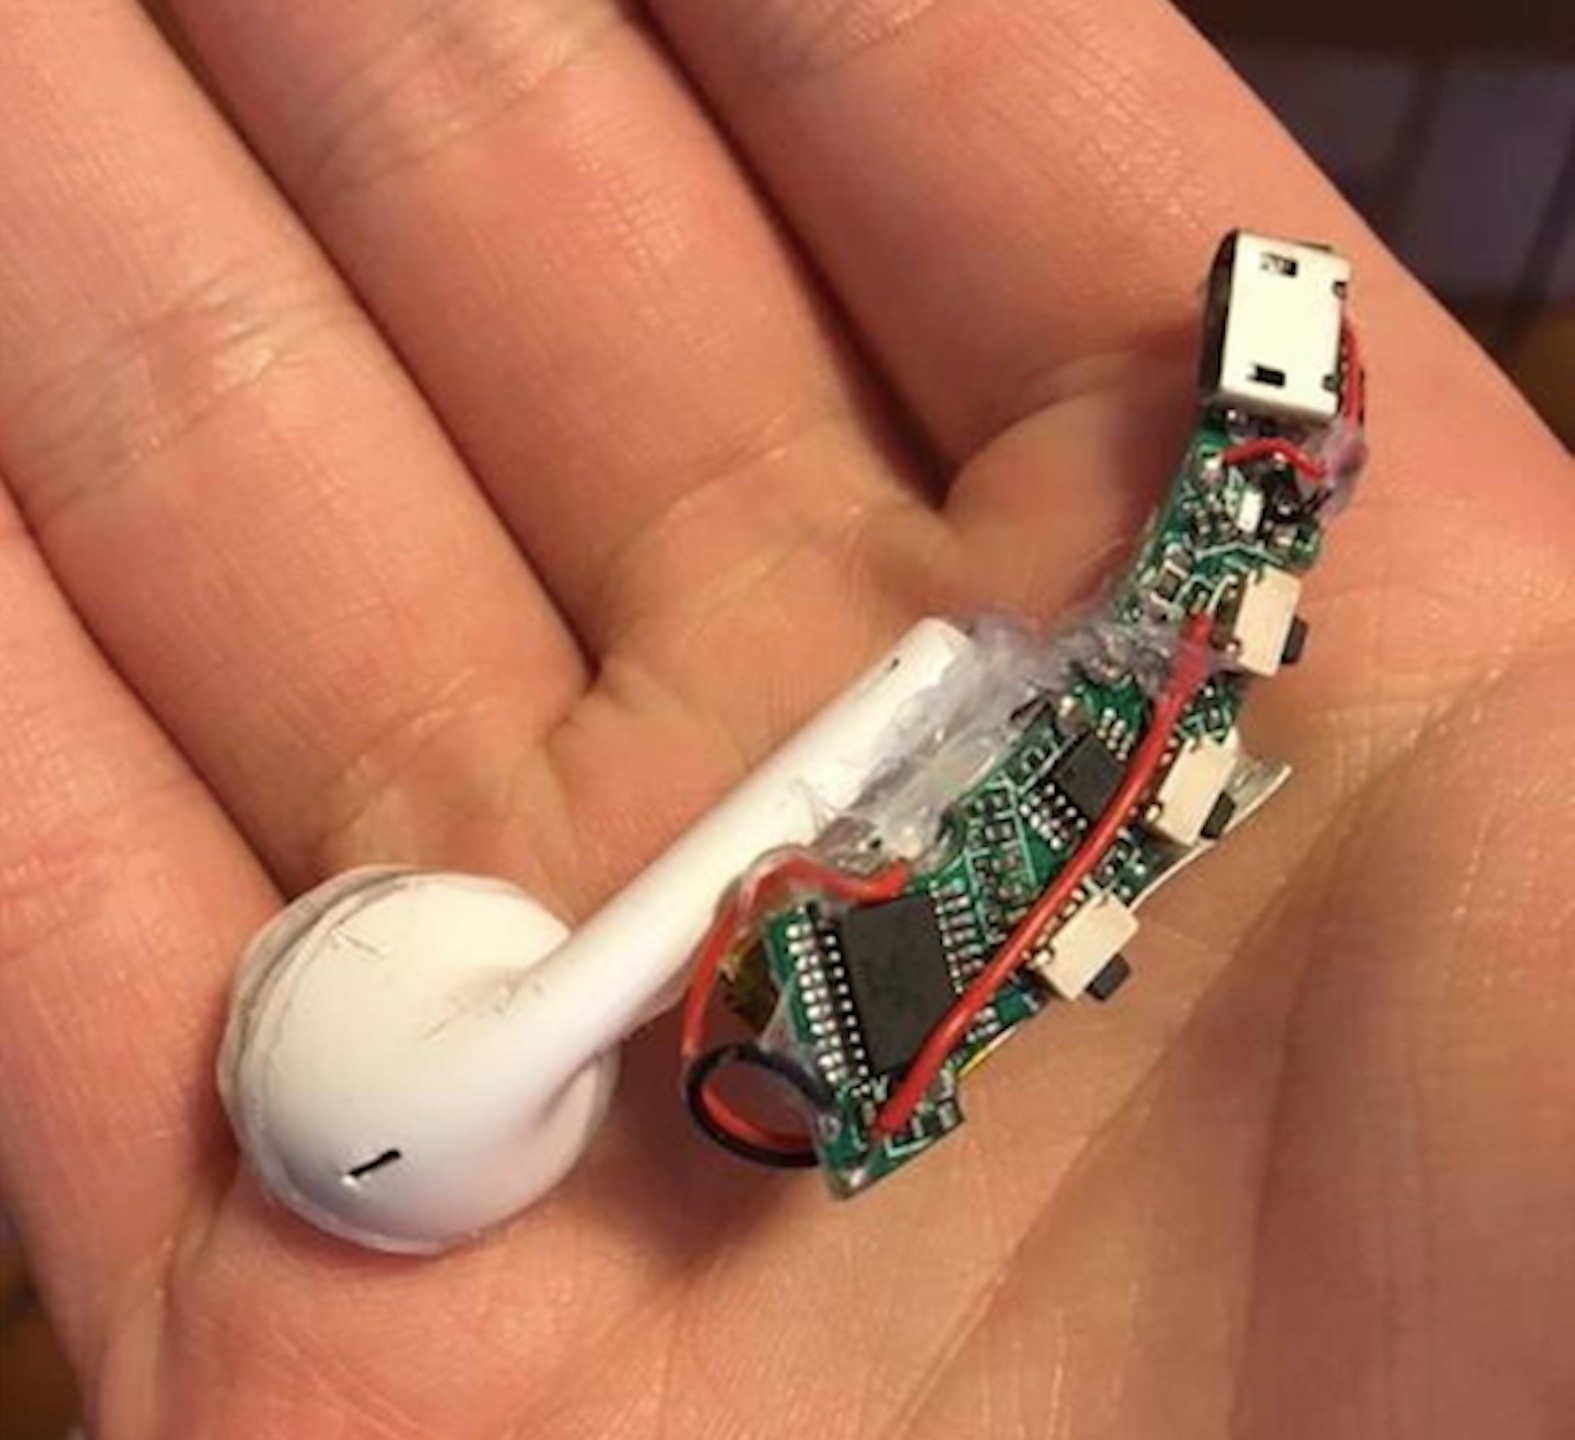 To Make Your Own AirPods for $4